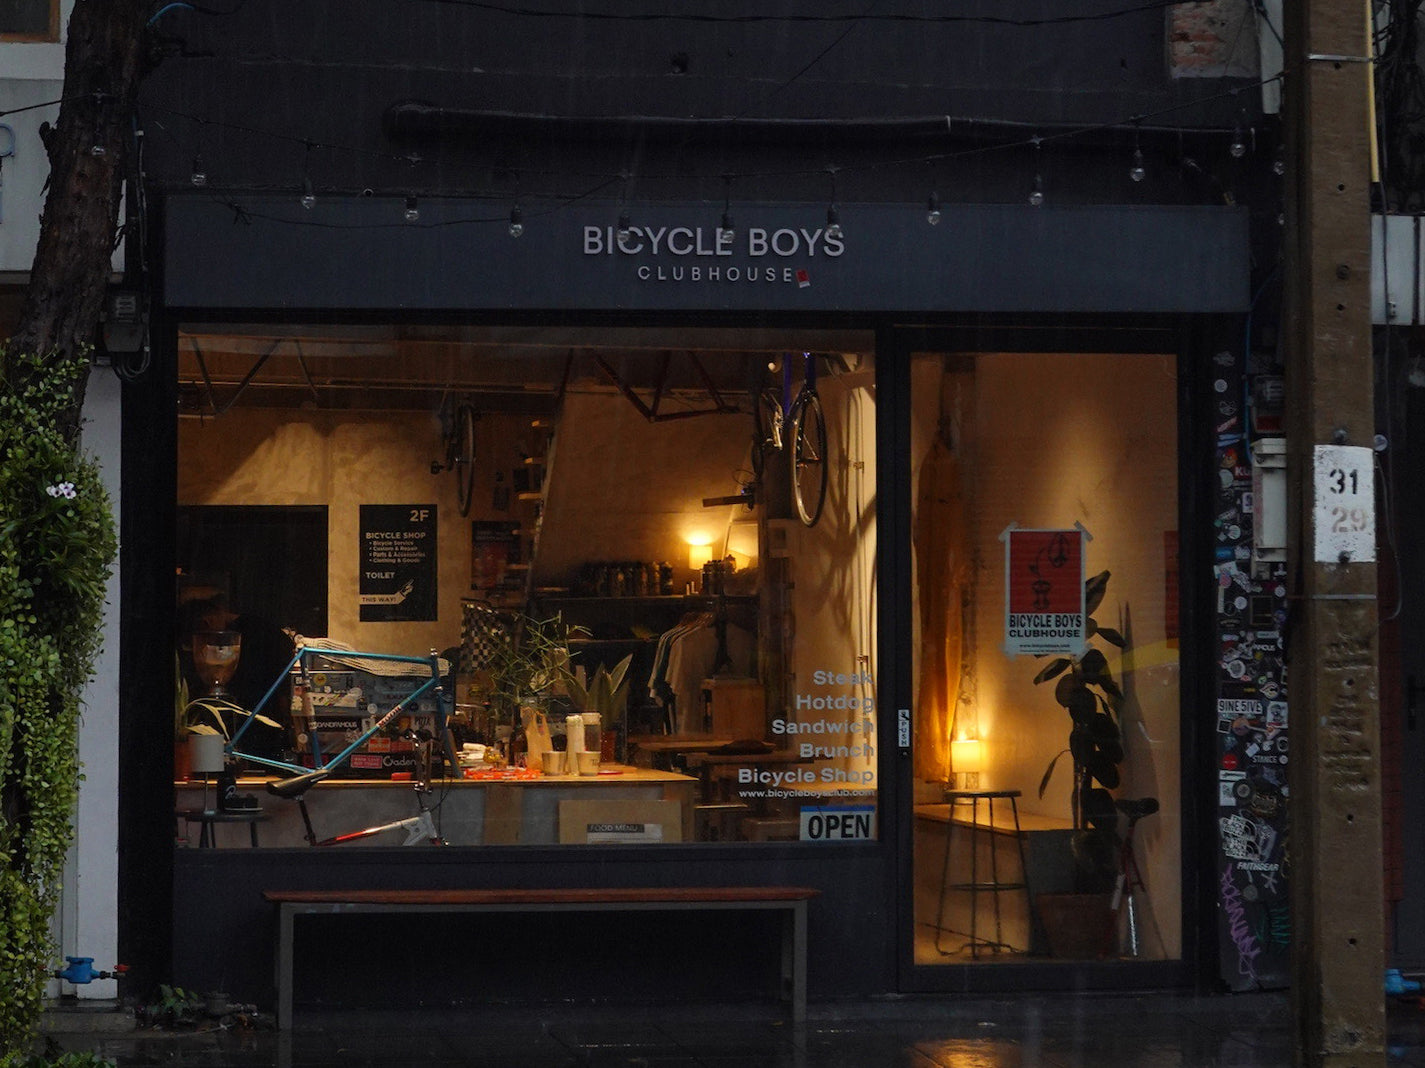 BicycleBoys Clubhouse